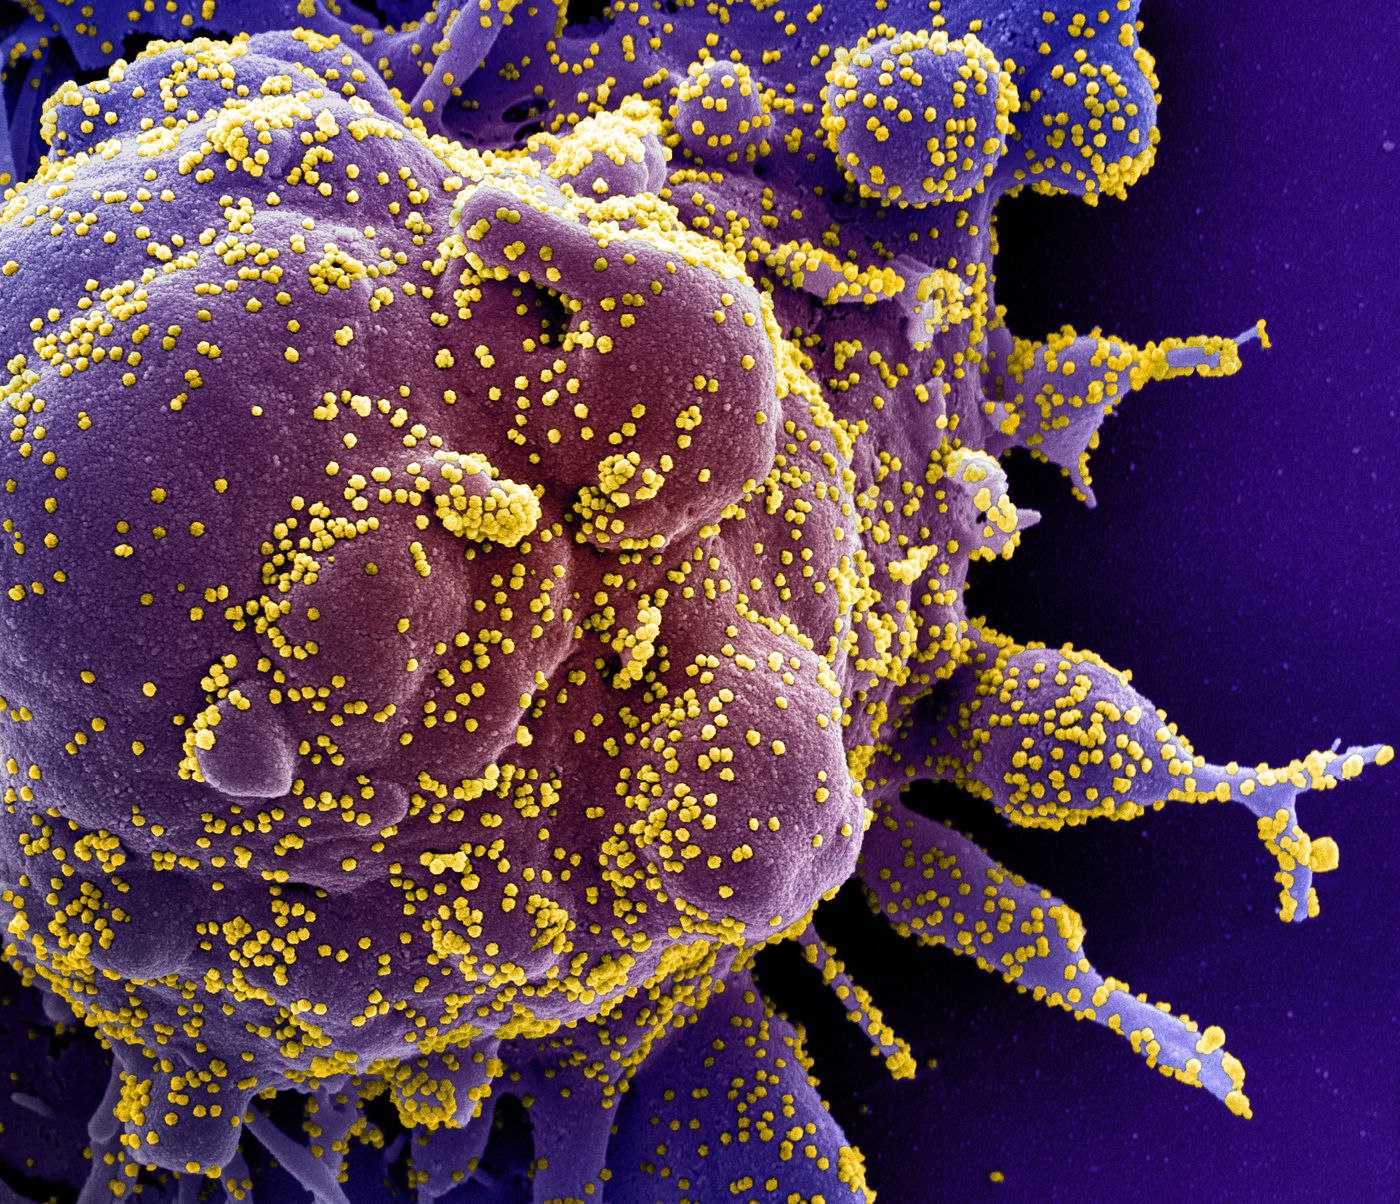 Colorized scanning electron micrograph of an apoptotic cell (purple) heavily infected with SARS-COV-2 virus particles (yellow), isolated from a patient sample. Image captured at the NIAID Integrated Research Facility (IRF) in Fort Detrick, Maryland. / Credit: NIAID